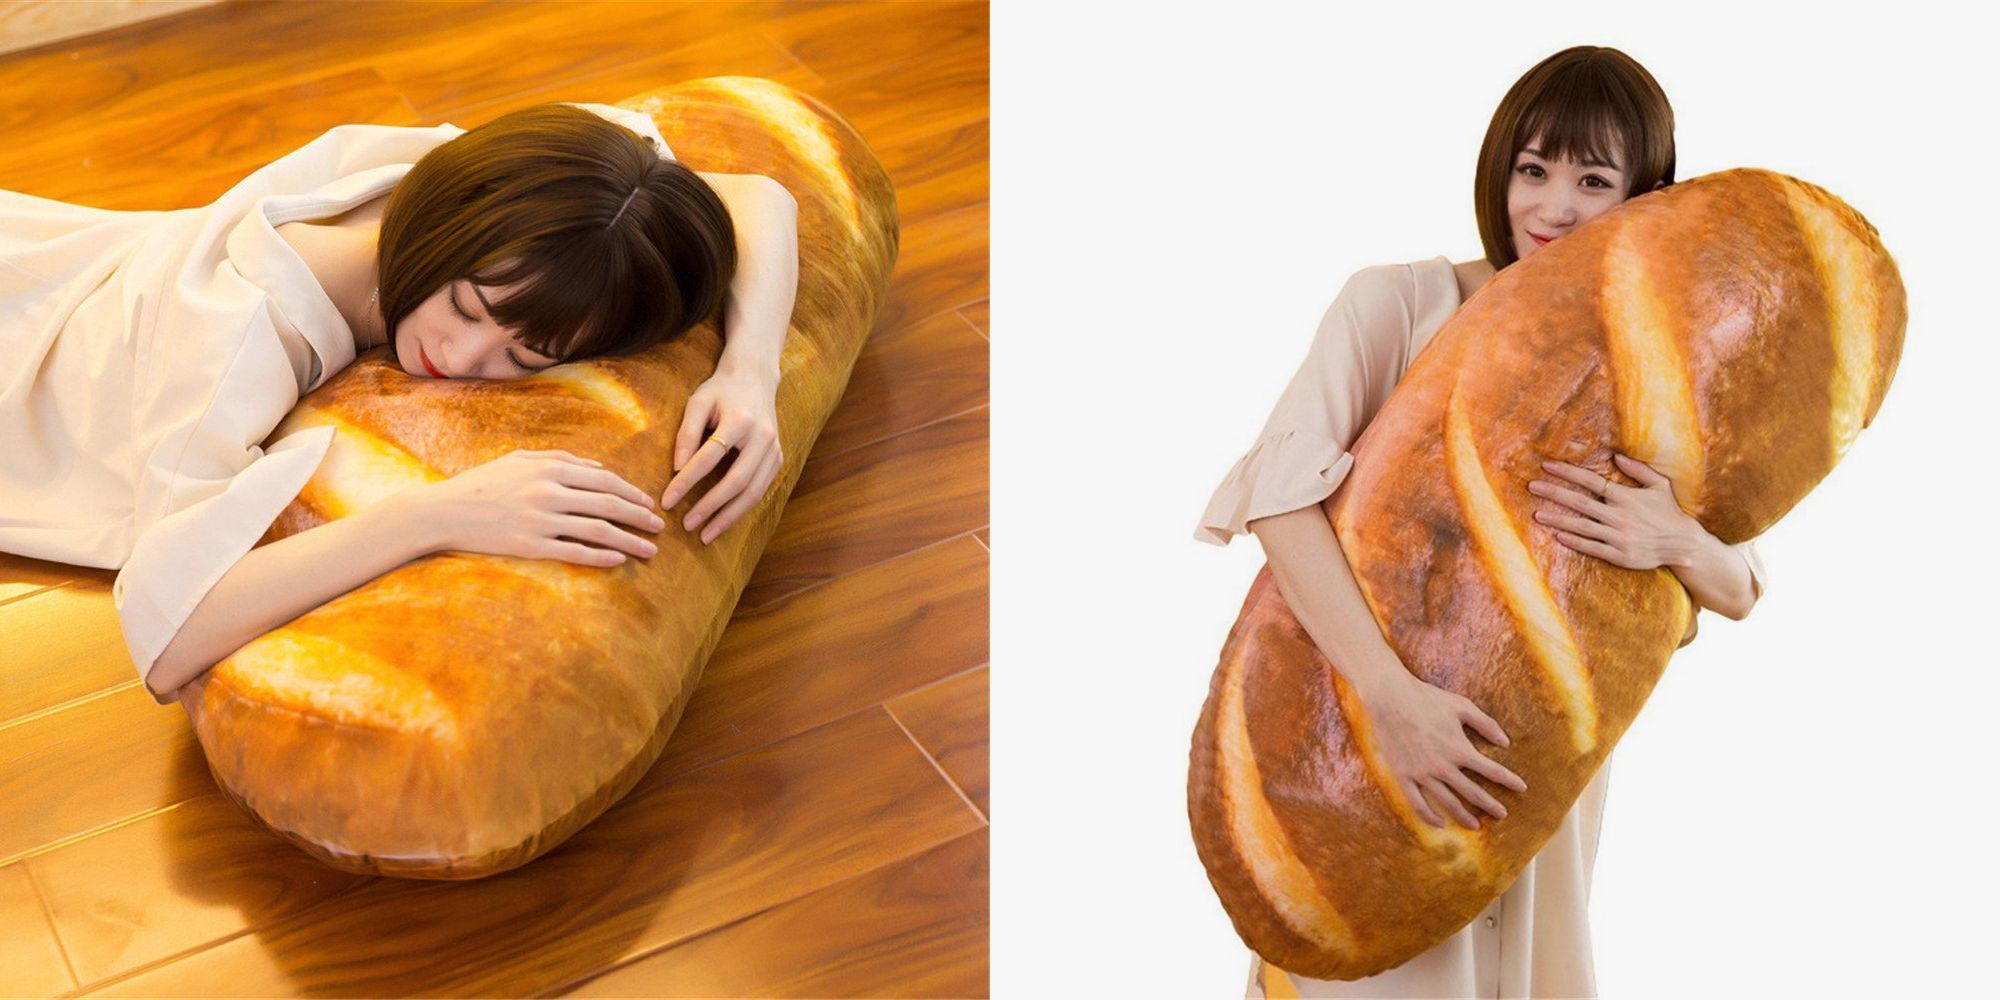 This Baguette Body Pillow Lets You Snuggle Your One True Love: Carbs